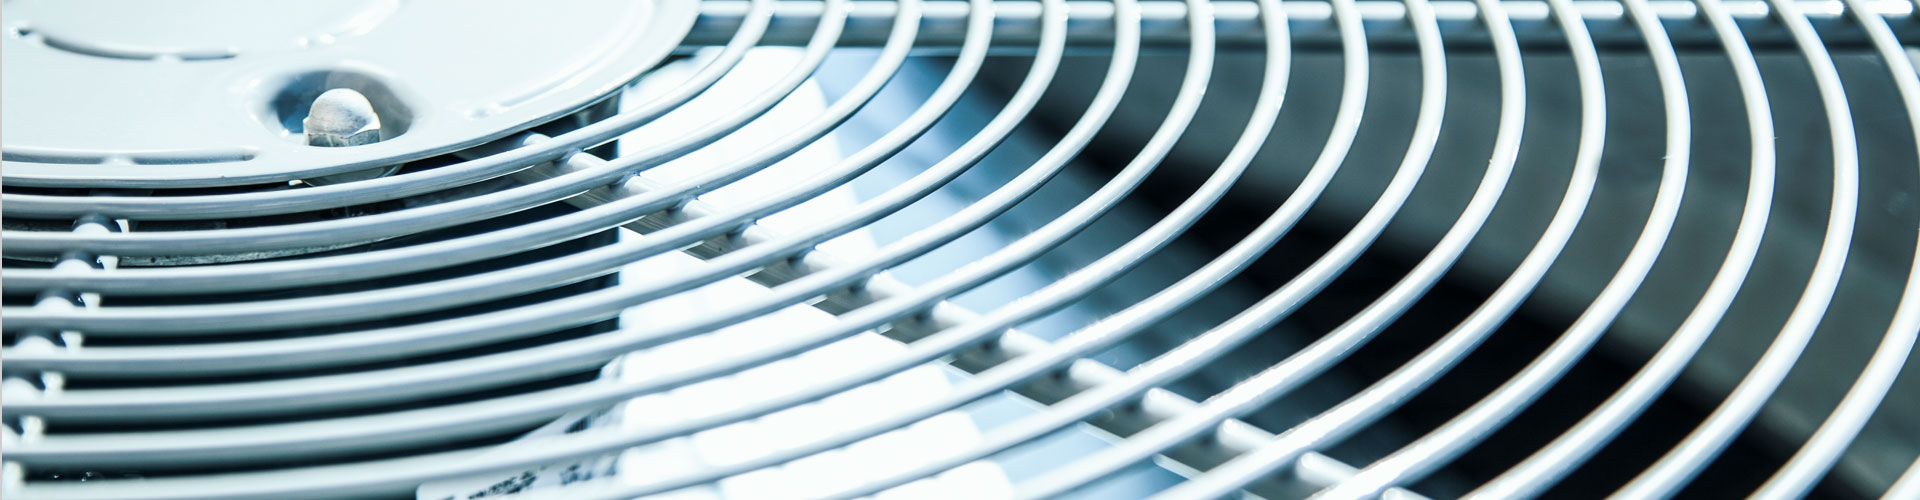 Closeup of a Central Air Conditioning fan